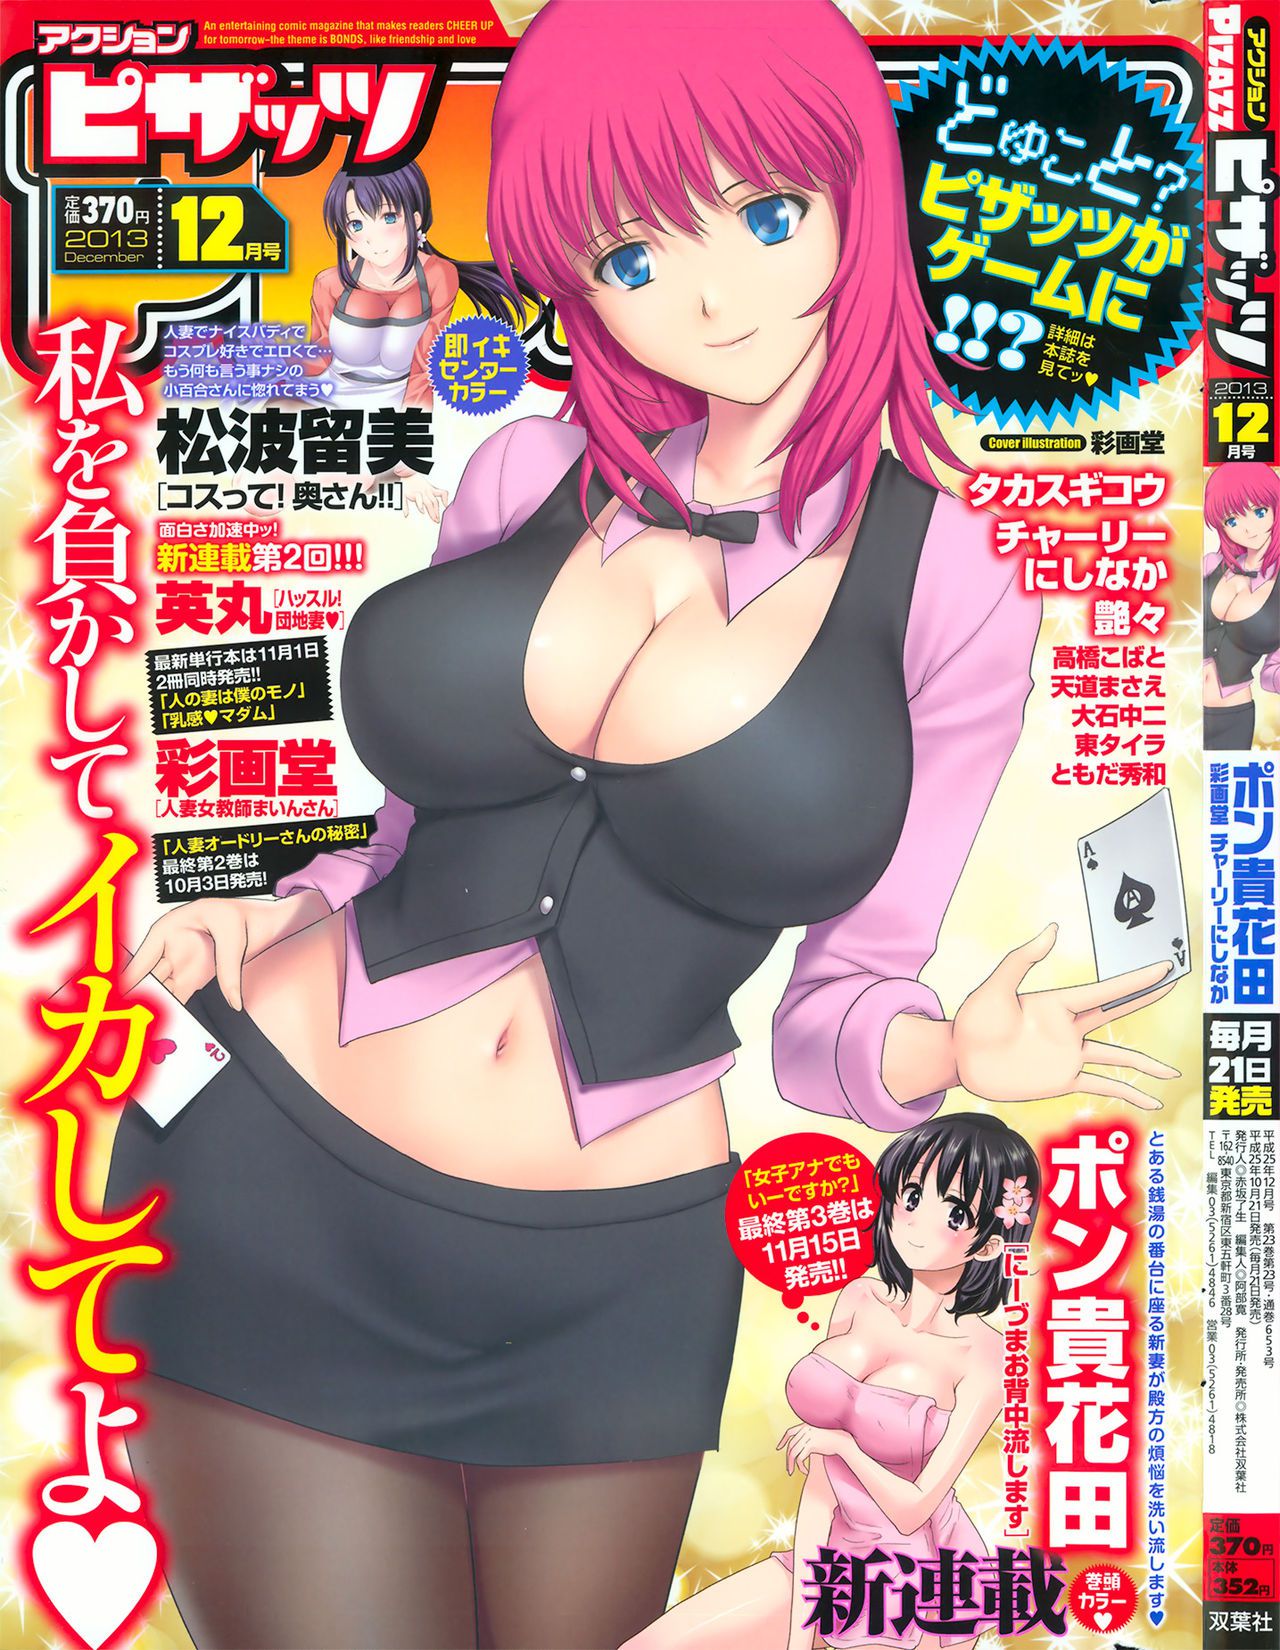 [Saigado] Cover Illustrations [彩画堂] Cover Illustrations 59